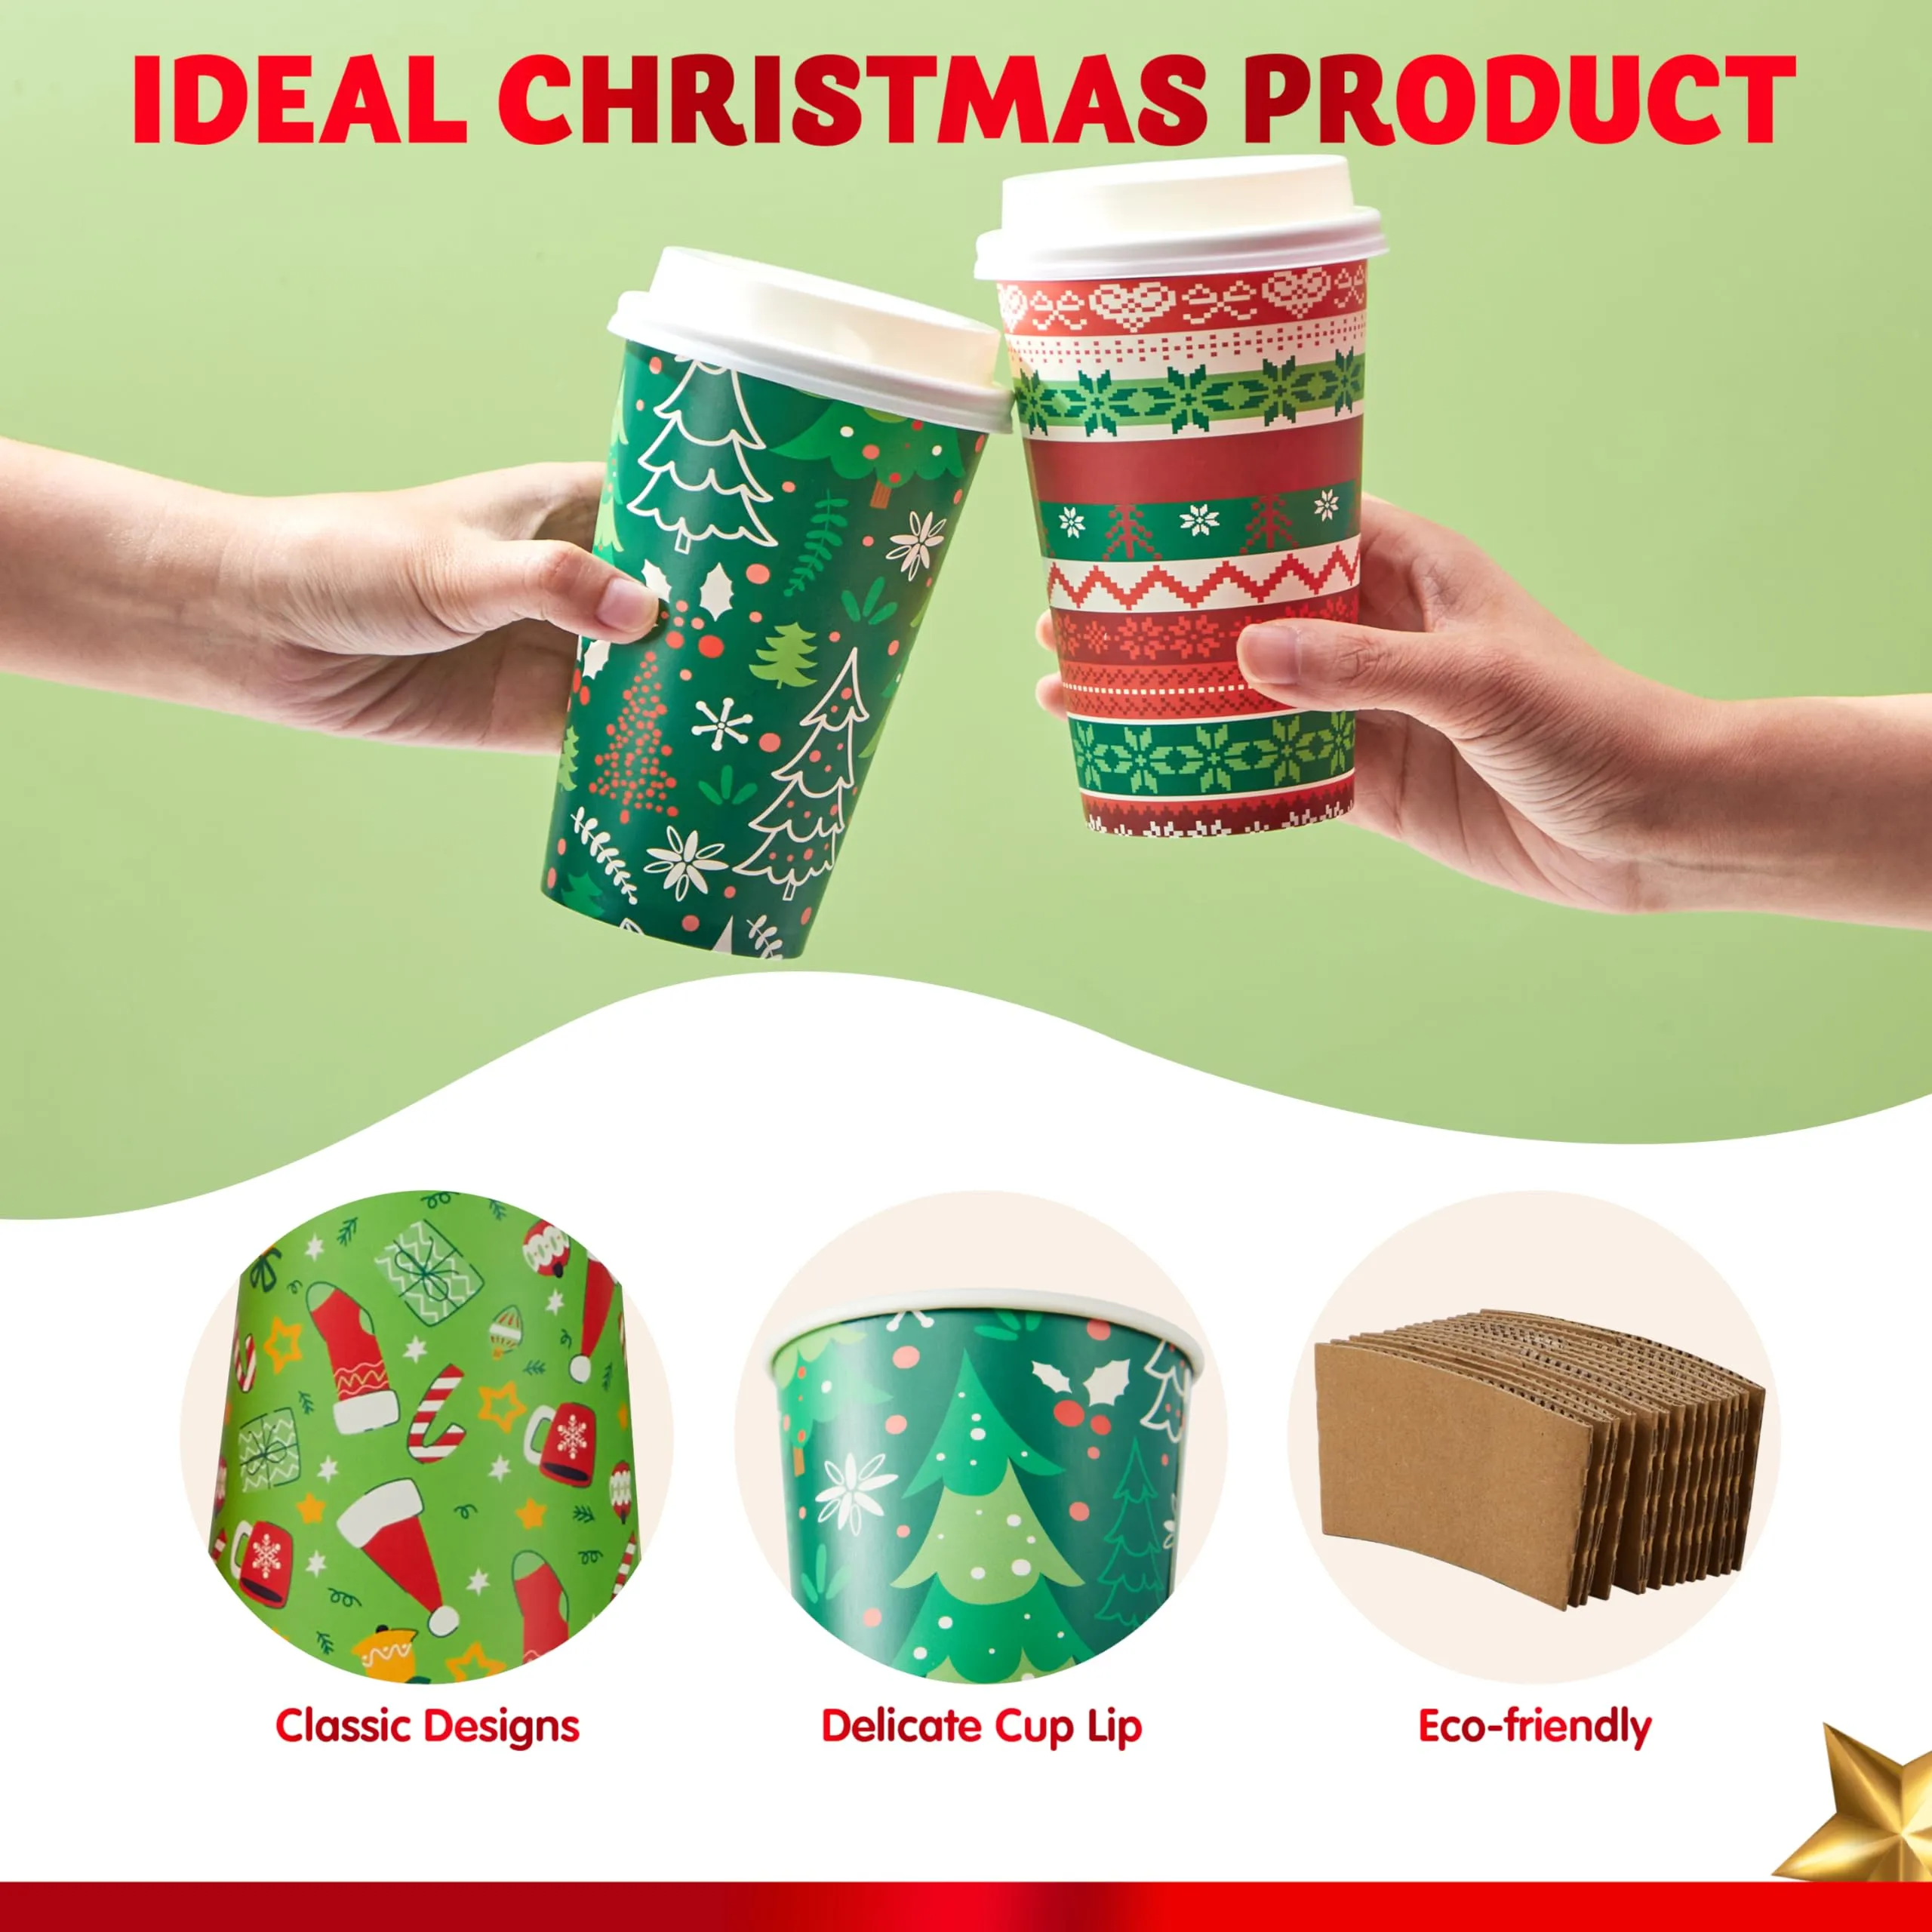 Buy Snowflake Compostable Paper Cups, 16 oz, Let It Snow - Christmas Holiday  Disposable Cups Now! Only $